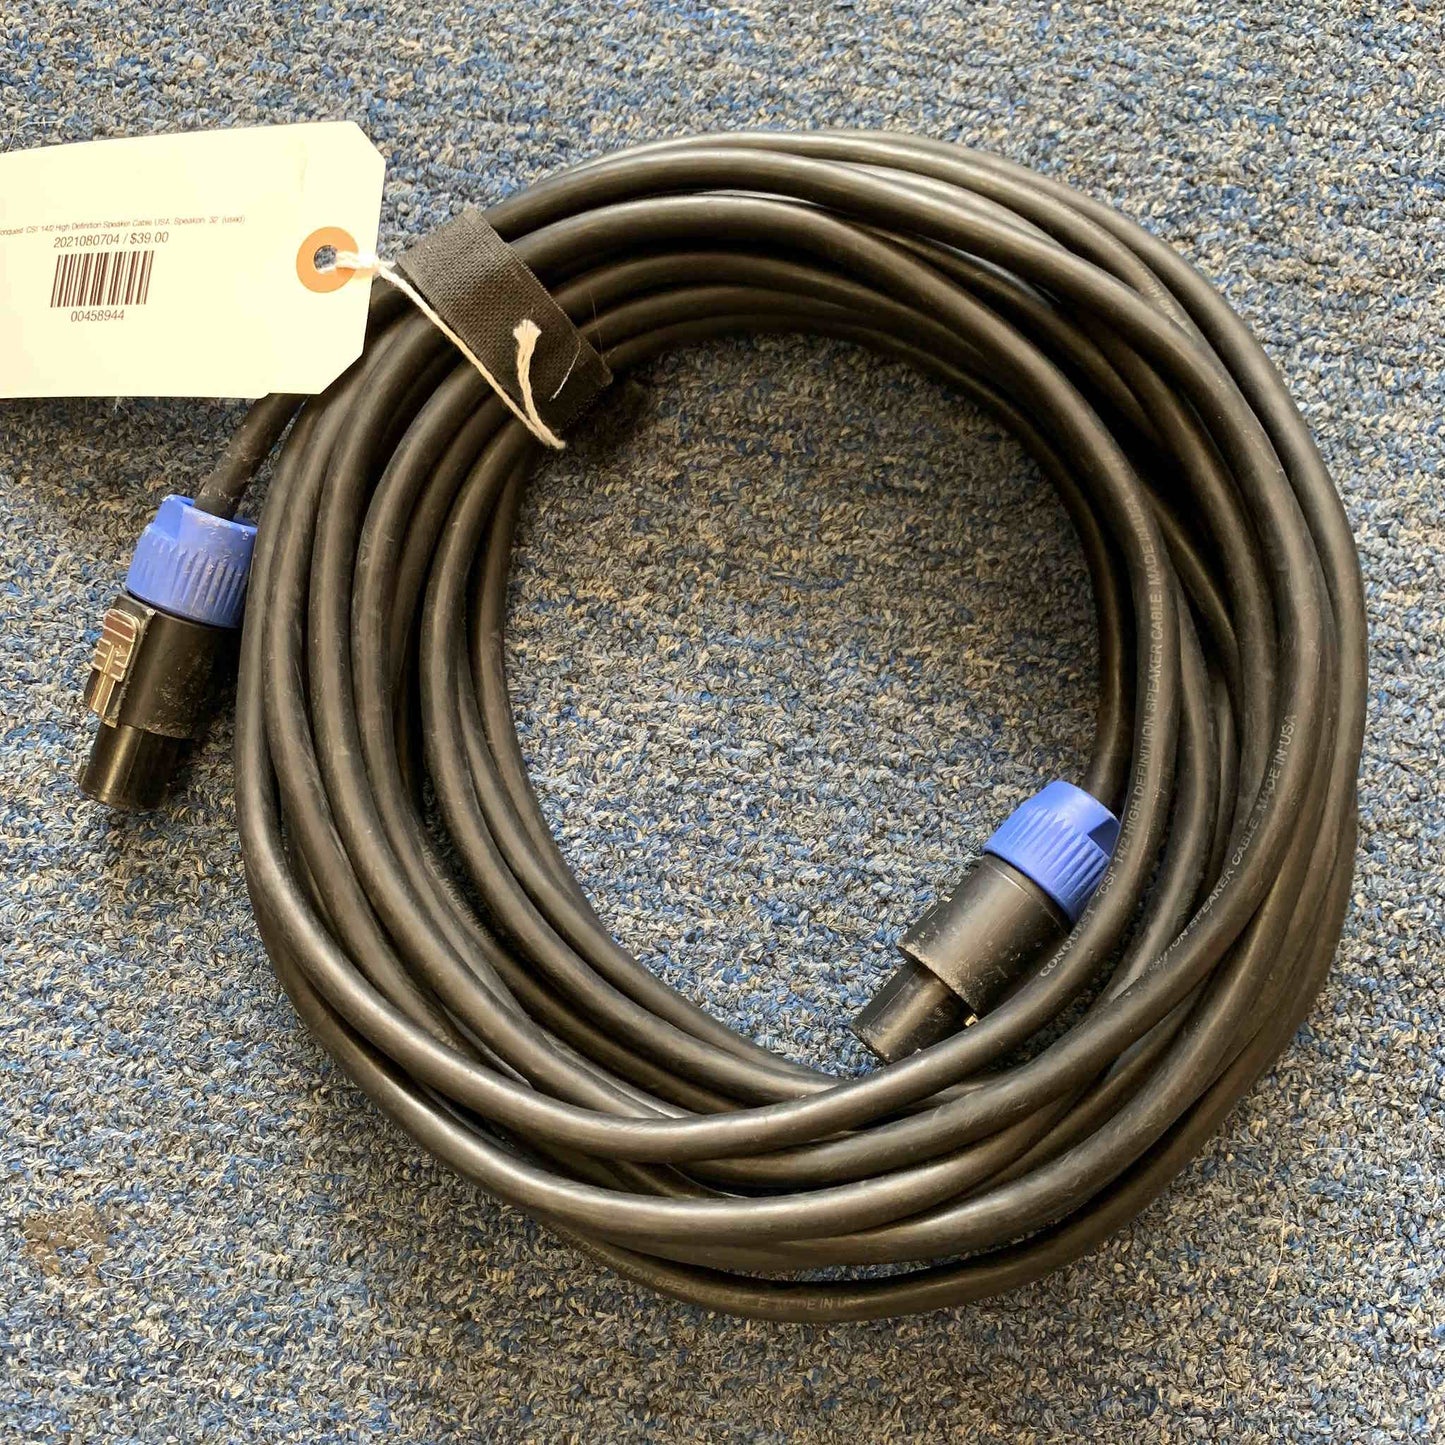 Conquest ‘CSI’ 14/2 High Definition Speaker Cable USA Speakon 32’ (used)